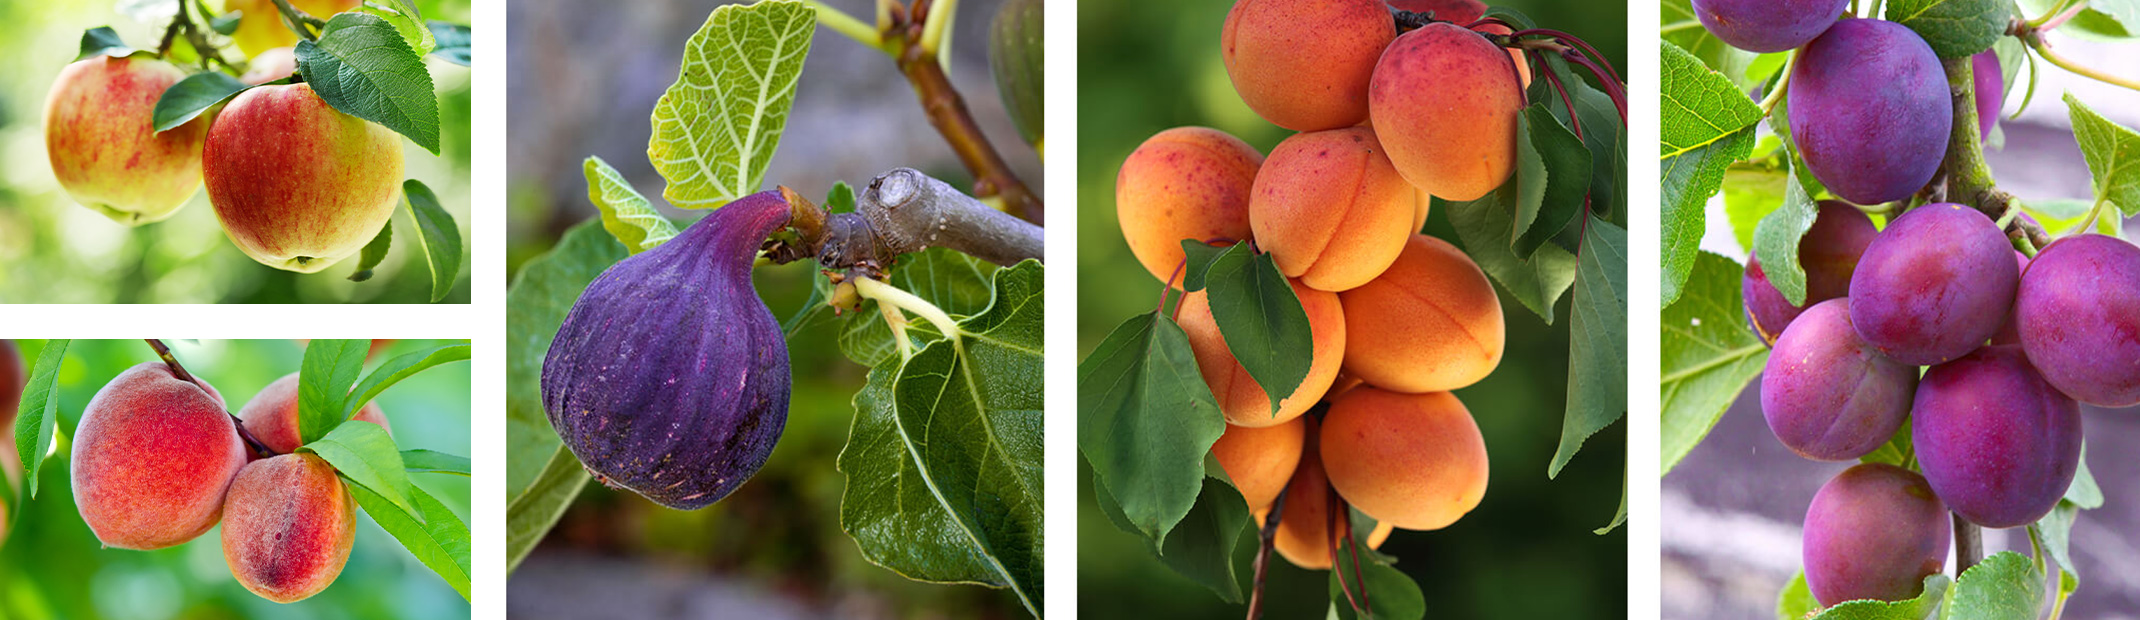 Apples, peaches, figs, apricots and plums growing on trees.